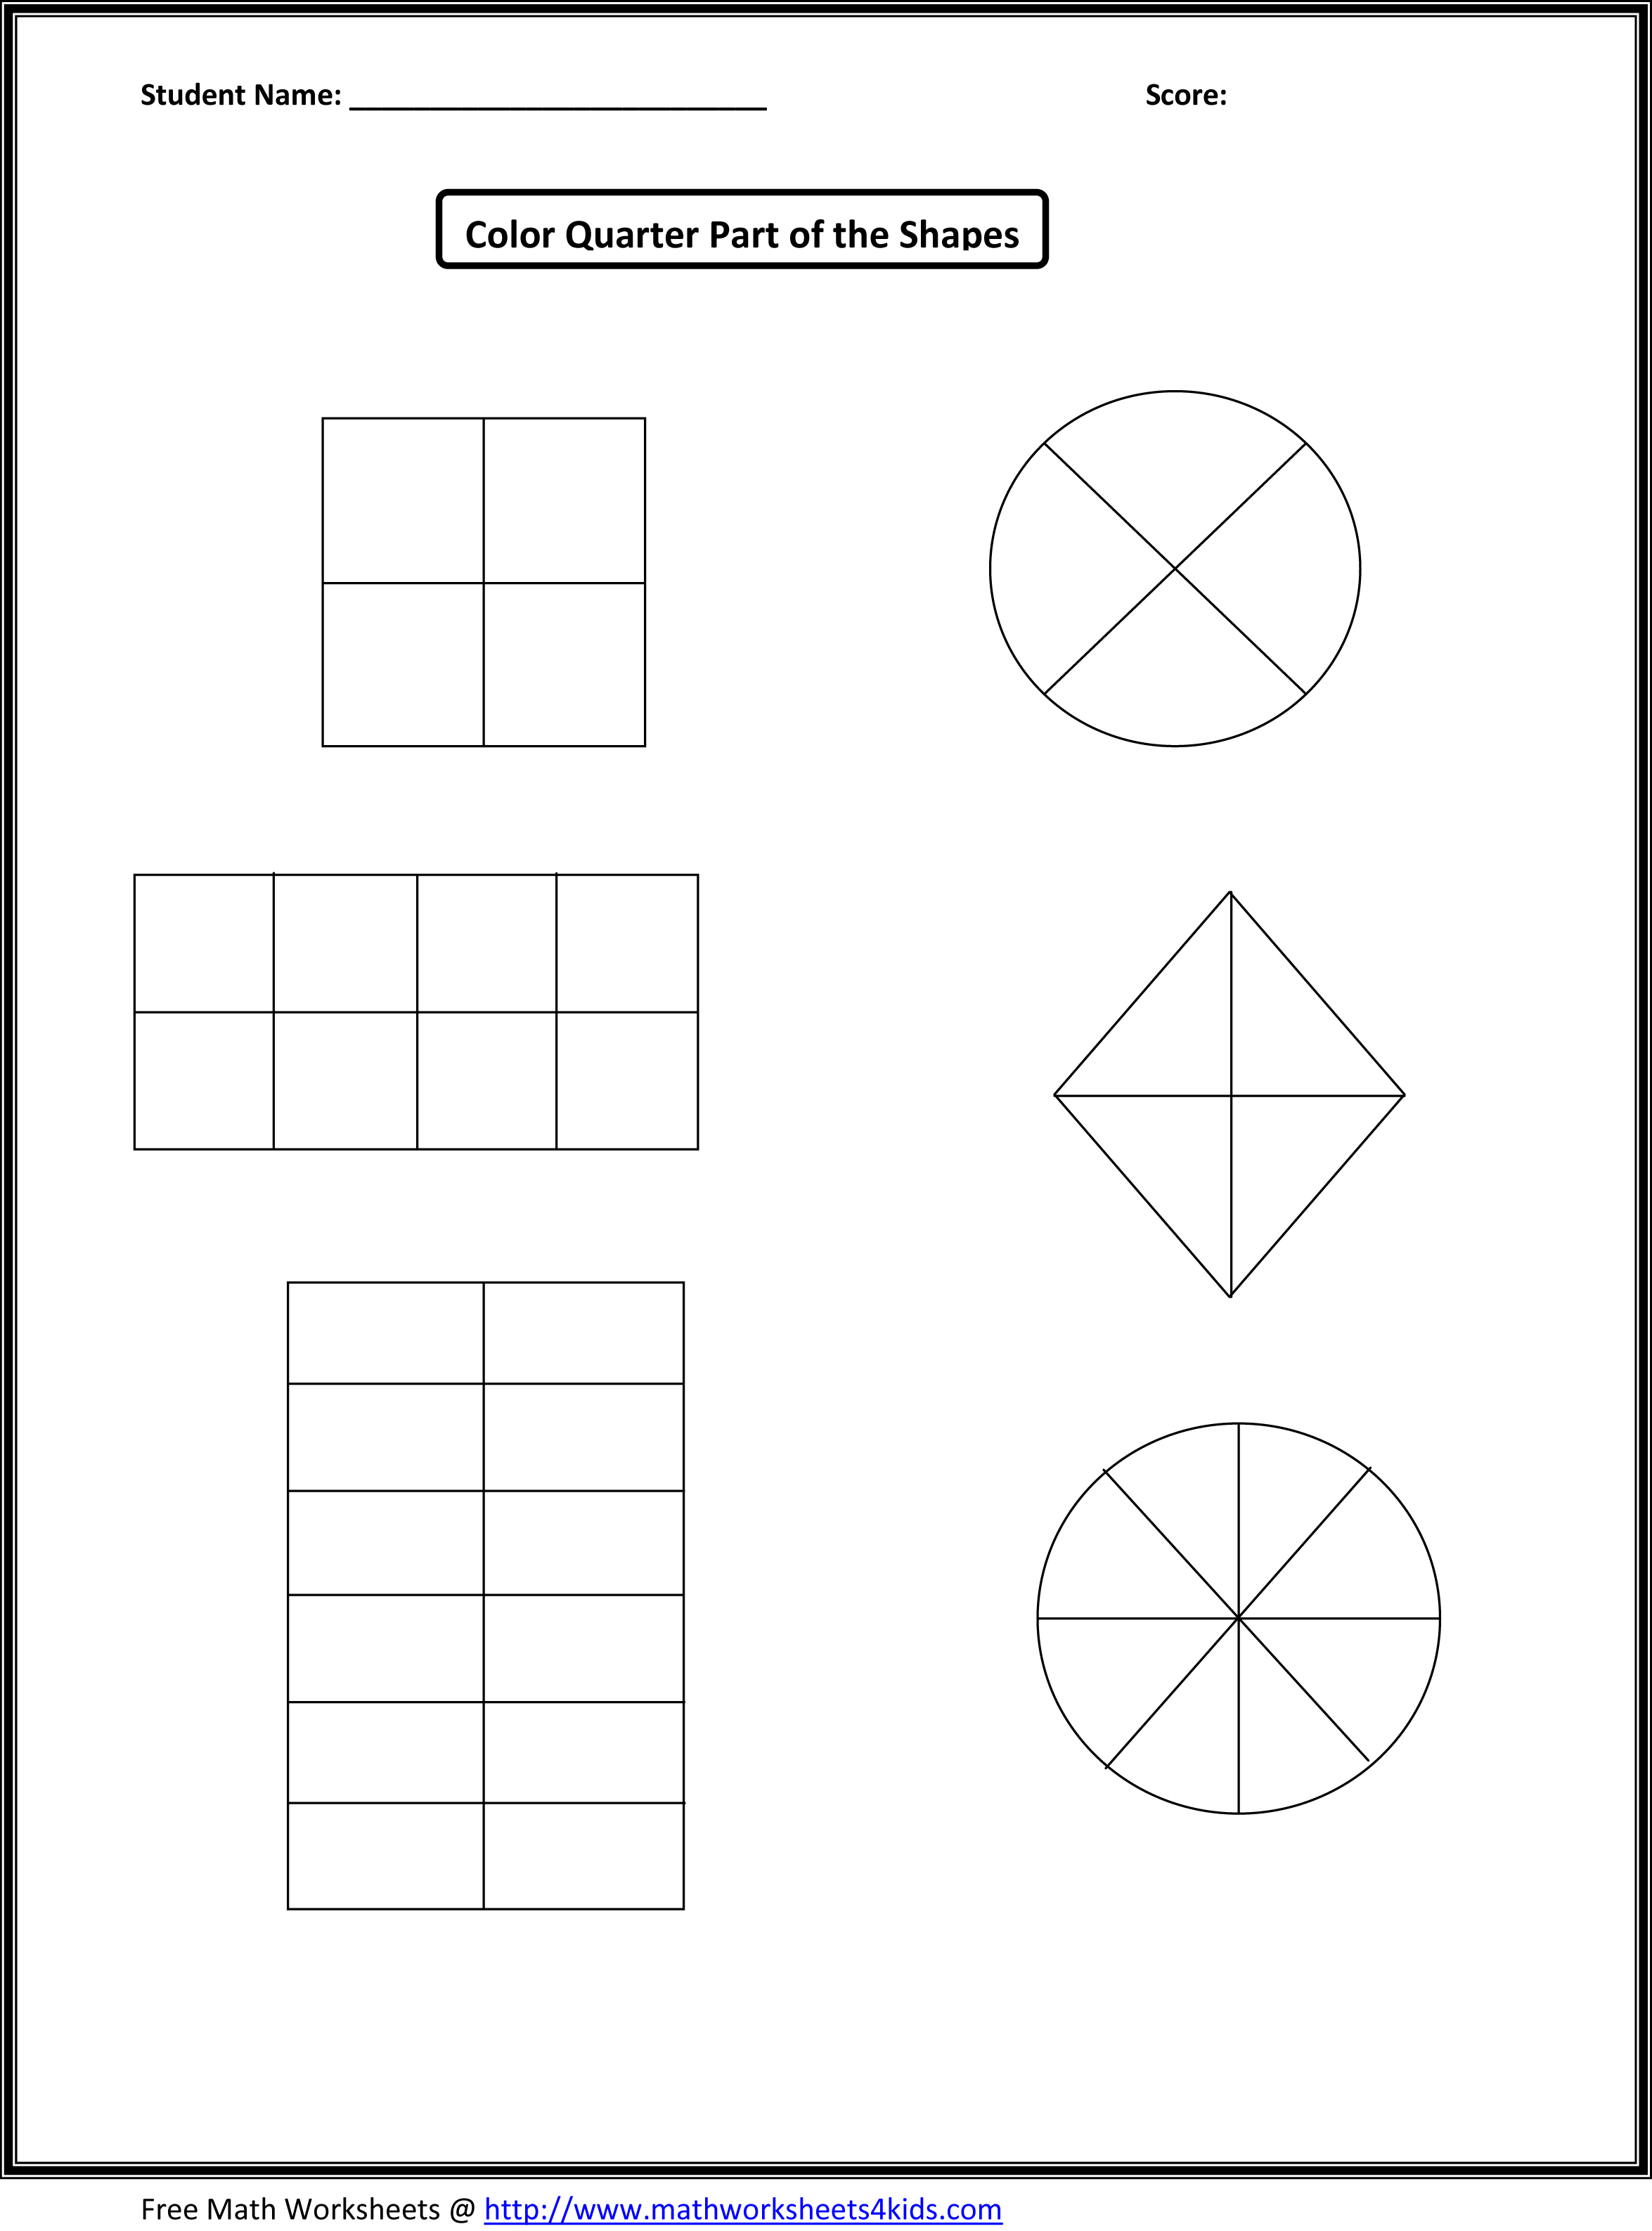 18 Best Images of First Grade Math Worksheets Sorting - 1st Grade Cut